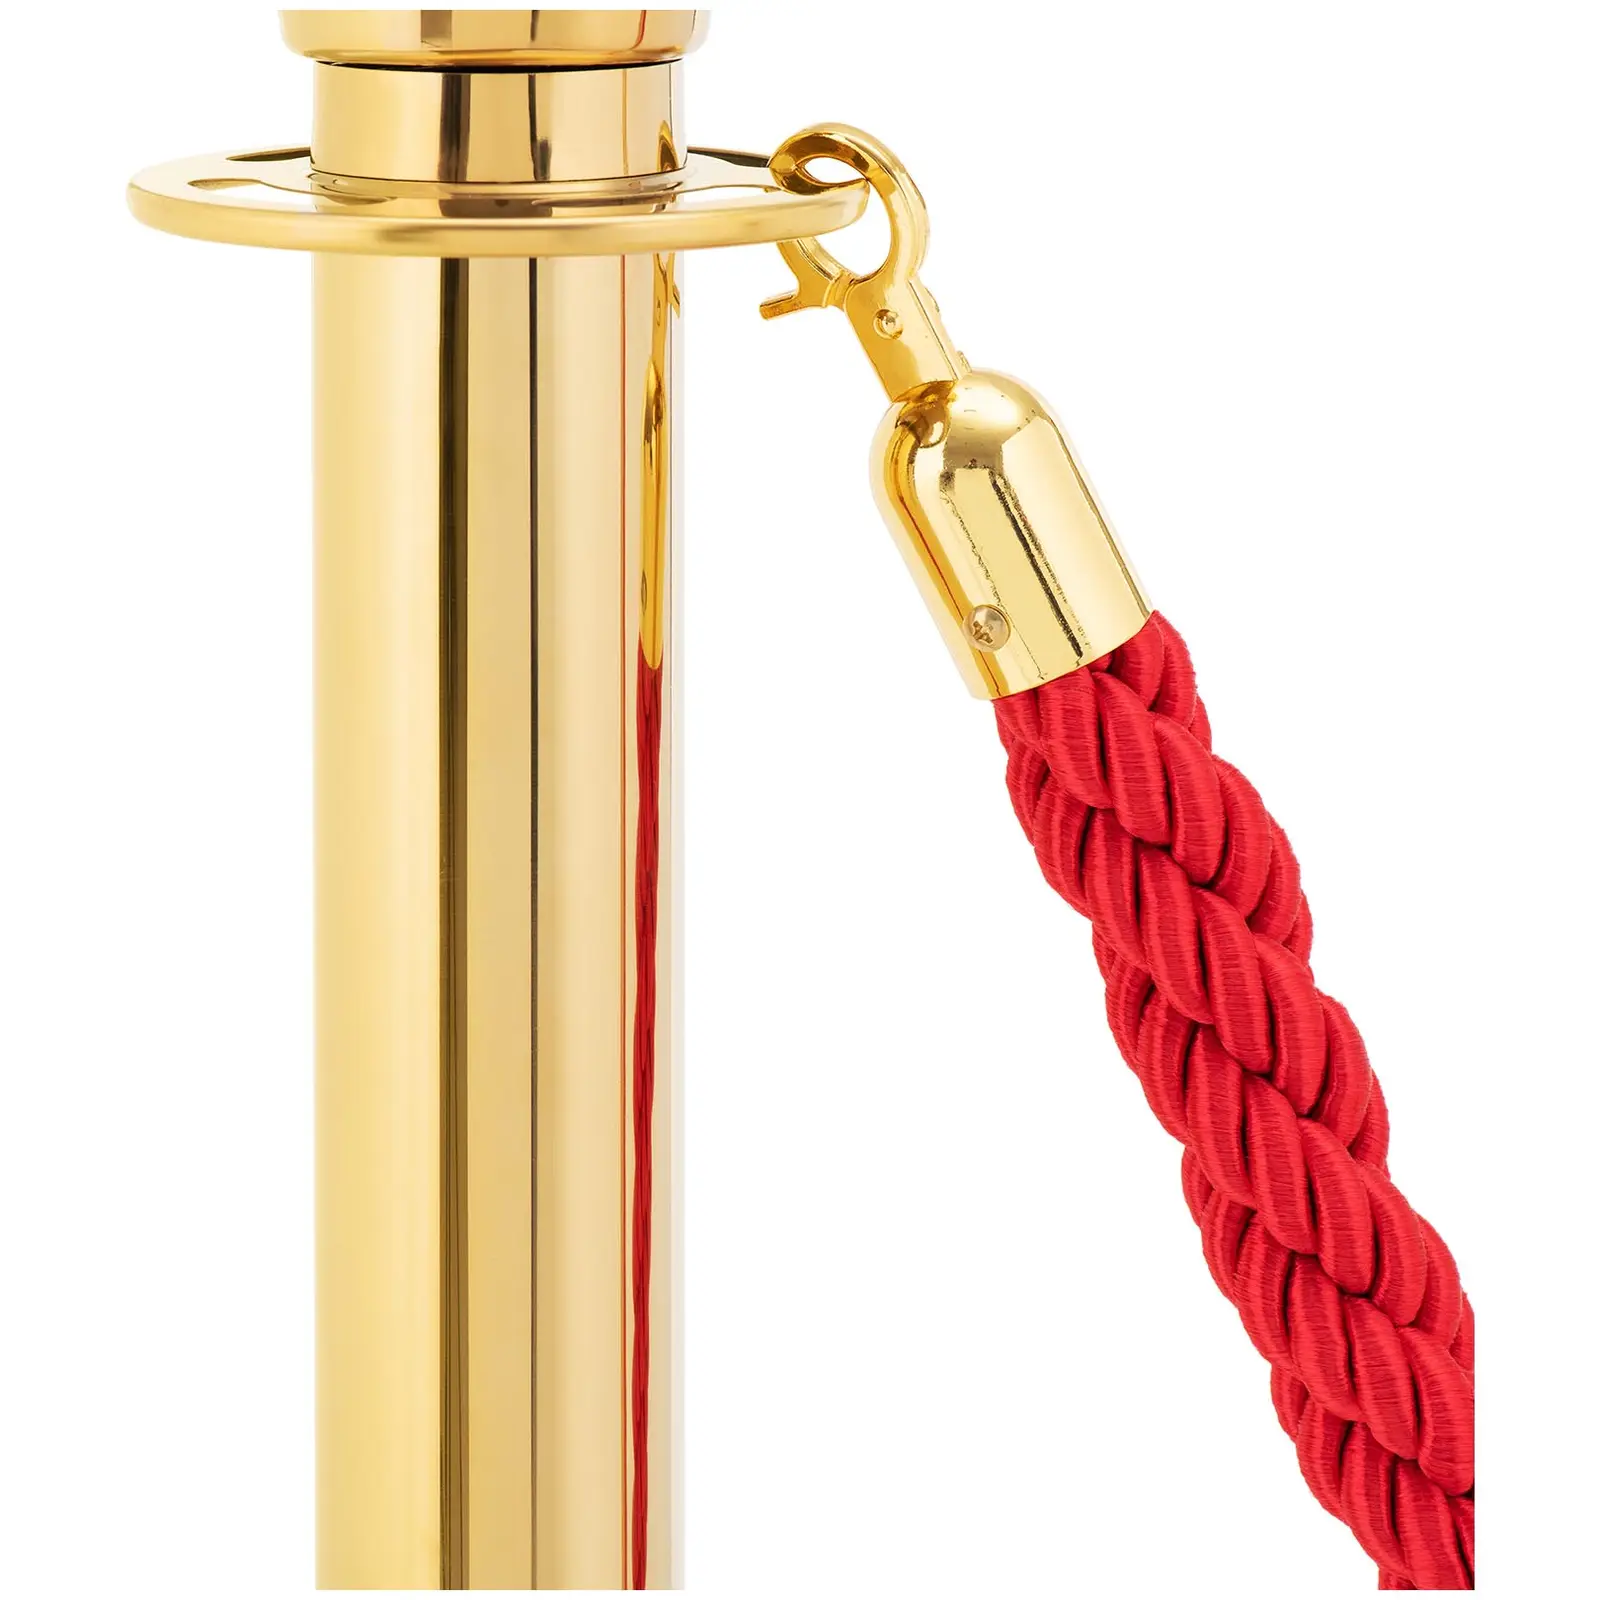 2 Barrier Posts - with barrier rope - 150 cm - colour - gold